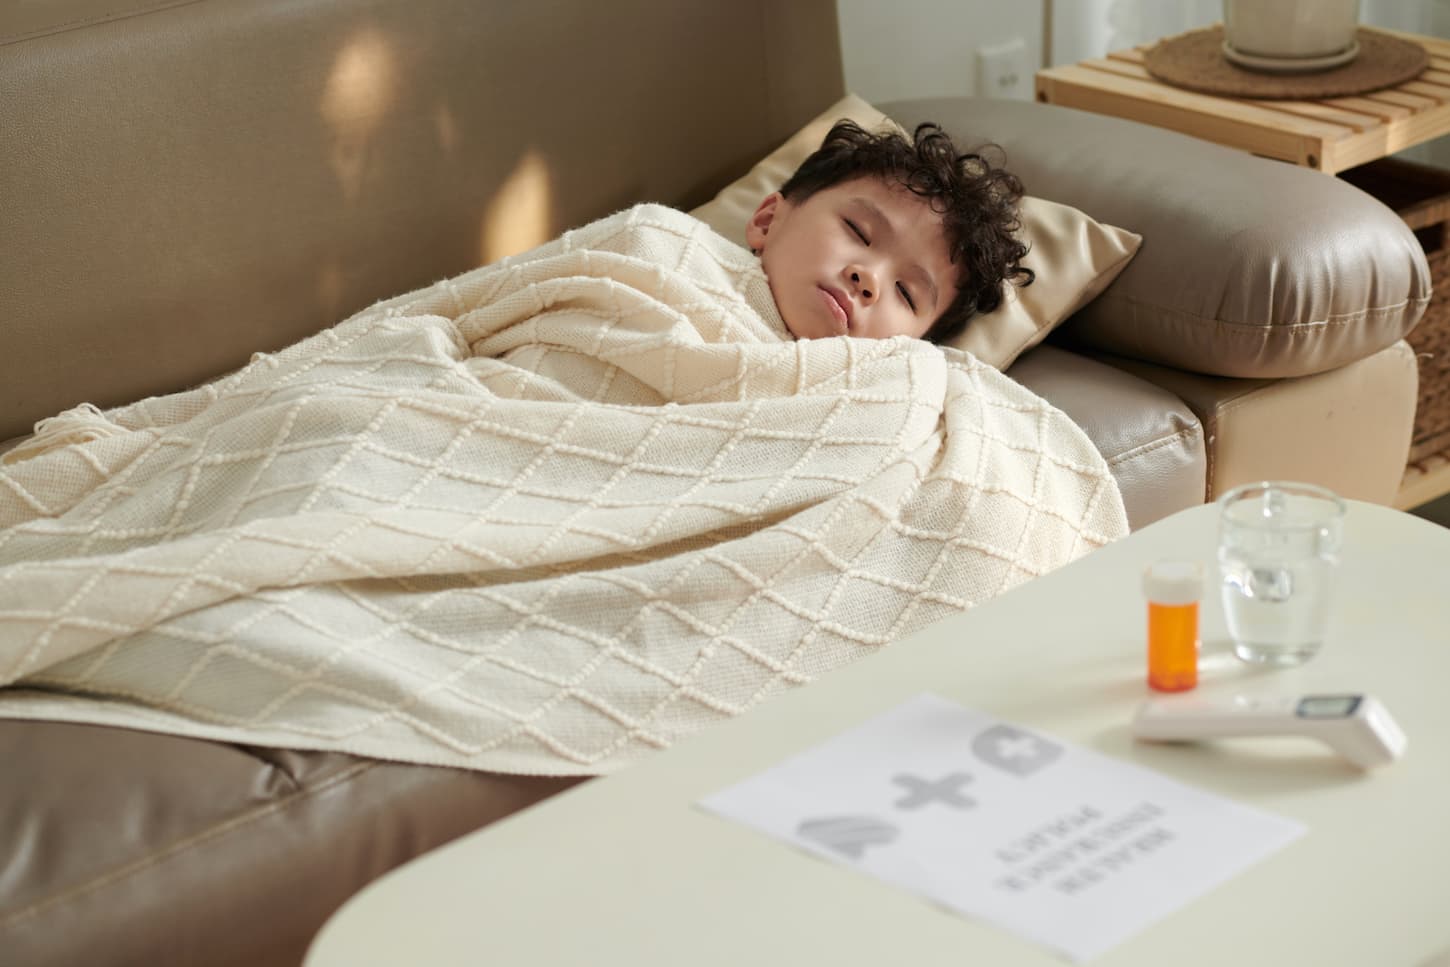 An image of a little sick boy tucked in a blanket sleeping with medicine, a glass of water, and a thermometer on a table near the sofa where the little boy sleeps.